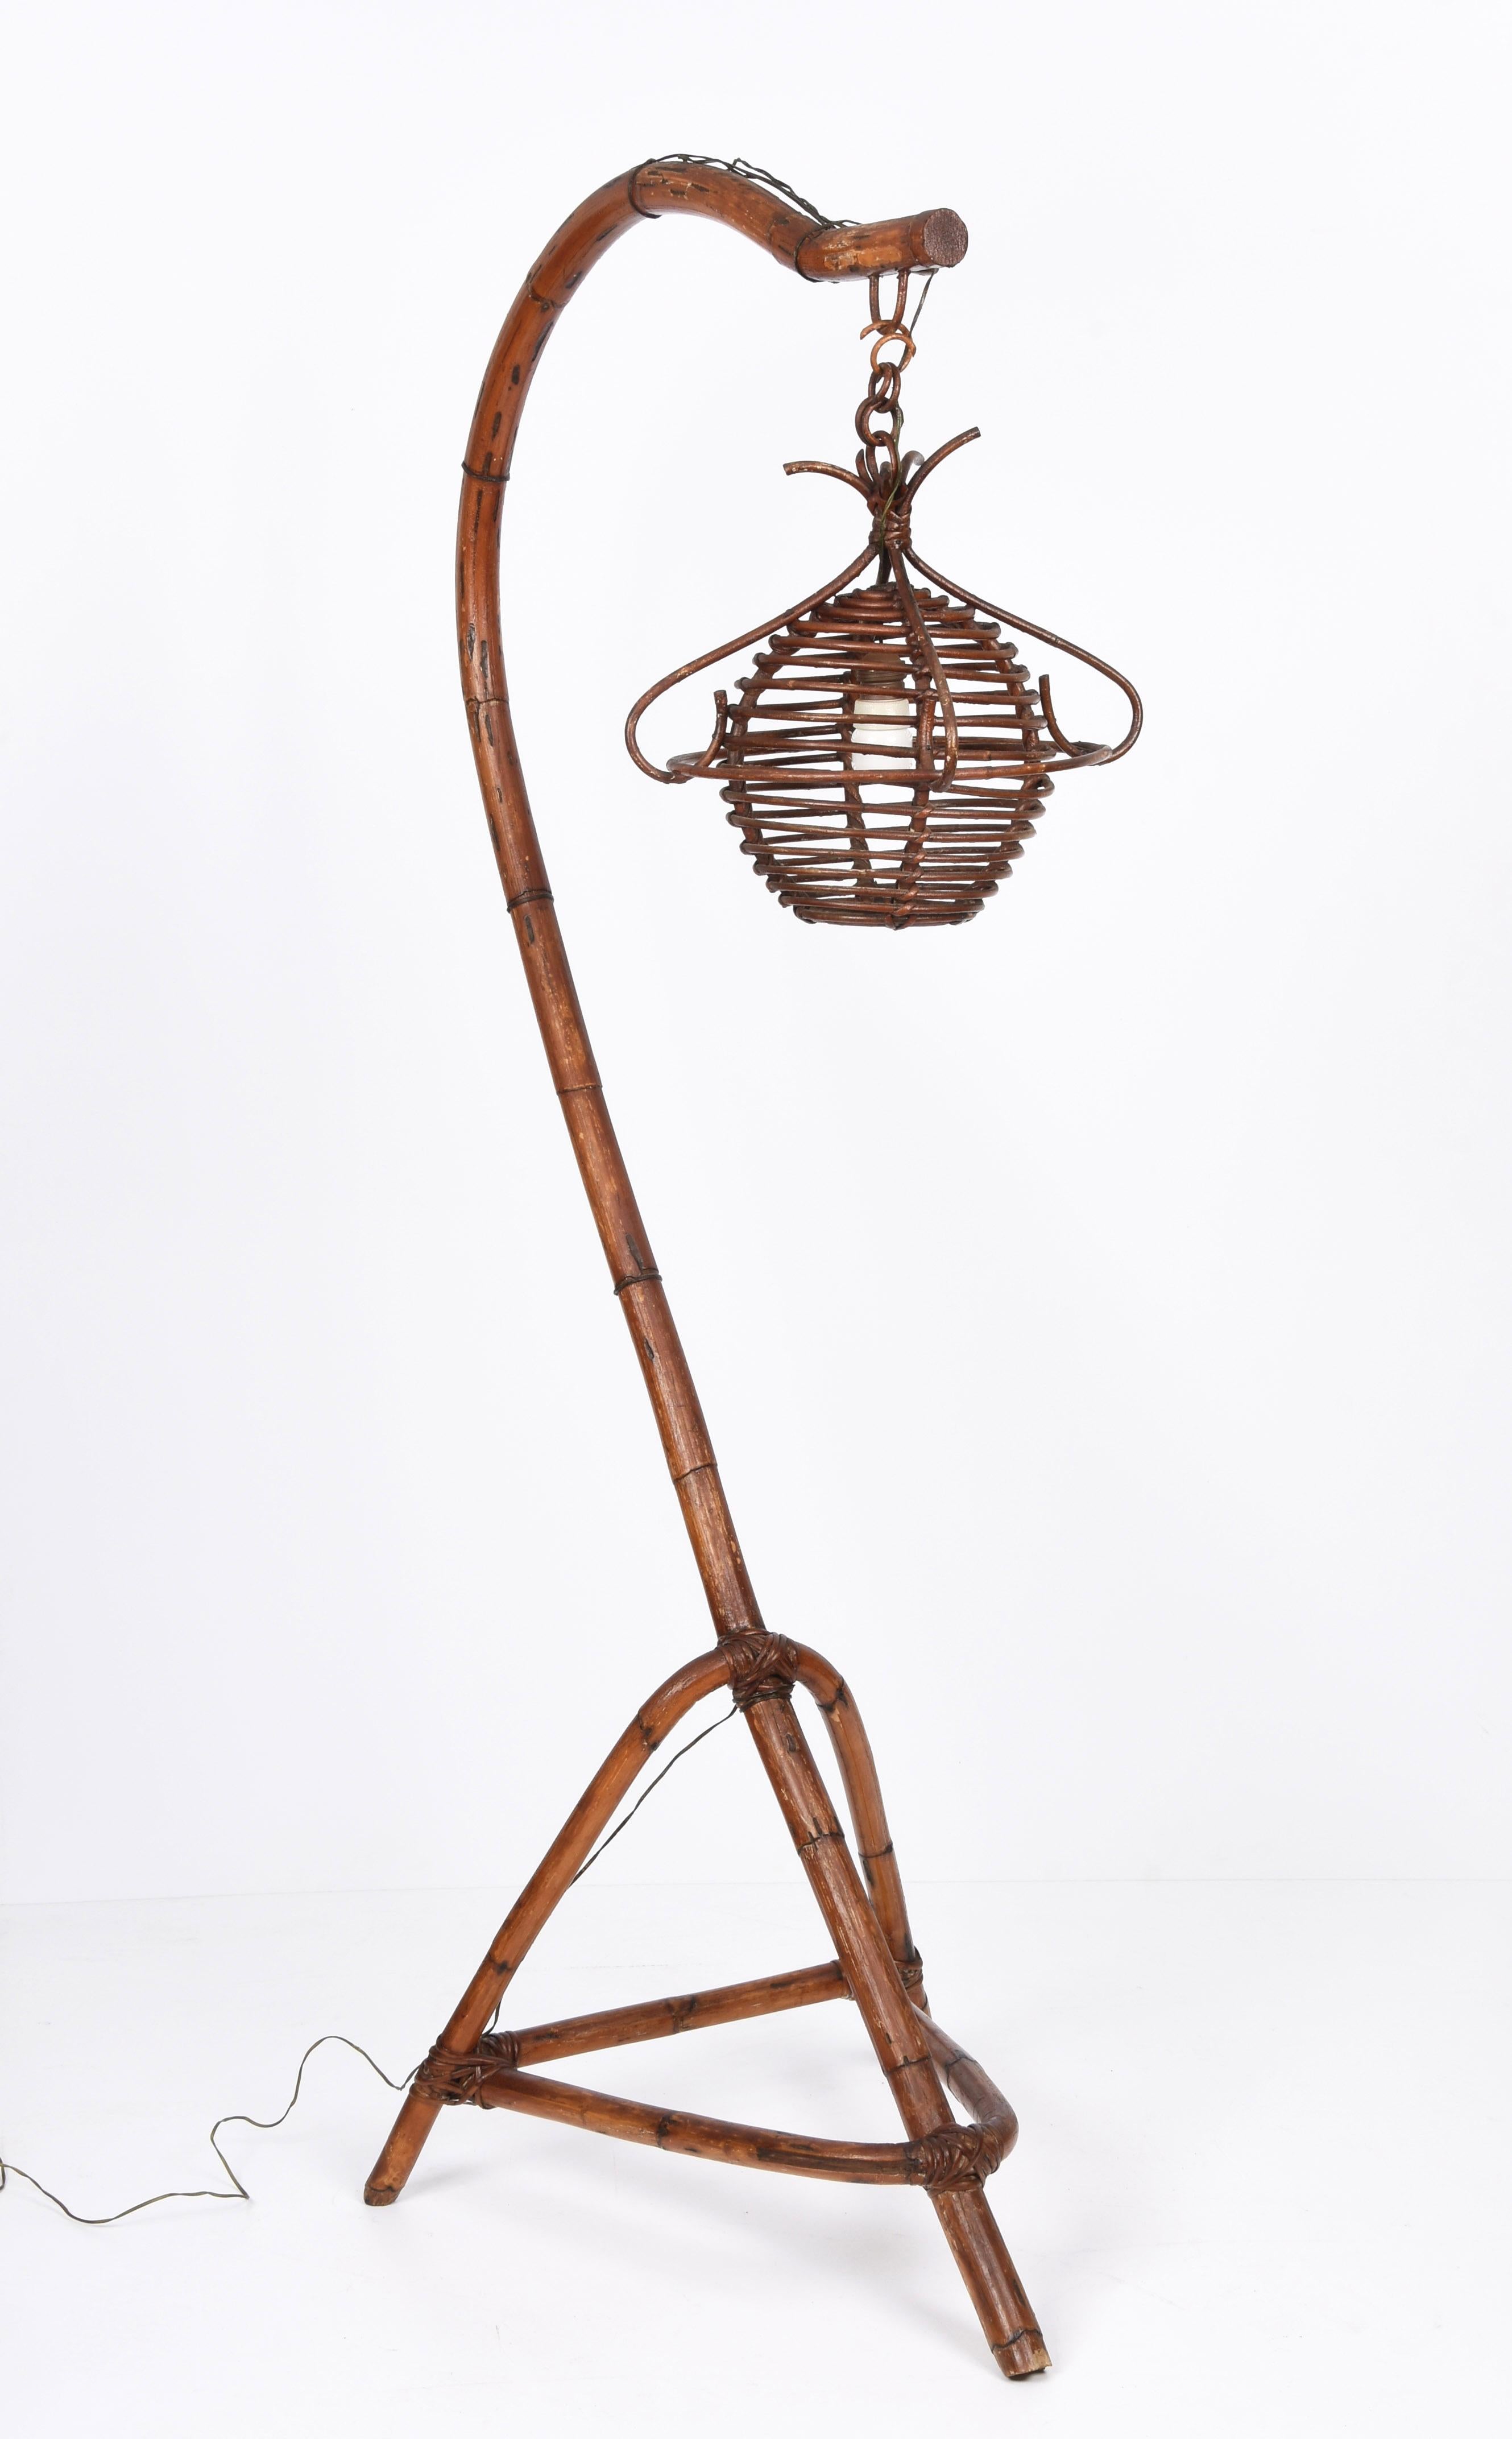 Midcentury Bamboo and Rattan Italian Floor Lamp with Tripod Base, 1950s For Sale 1